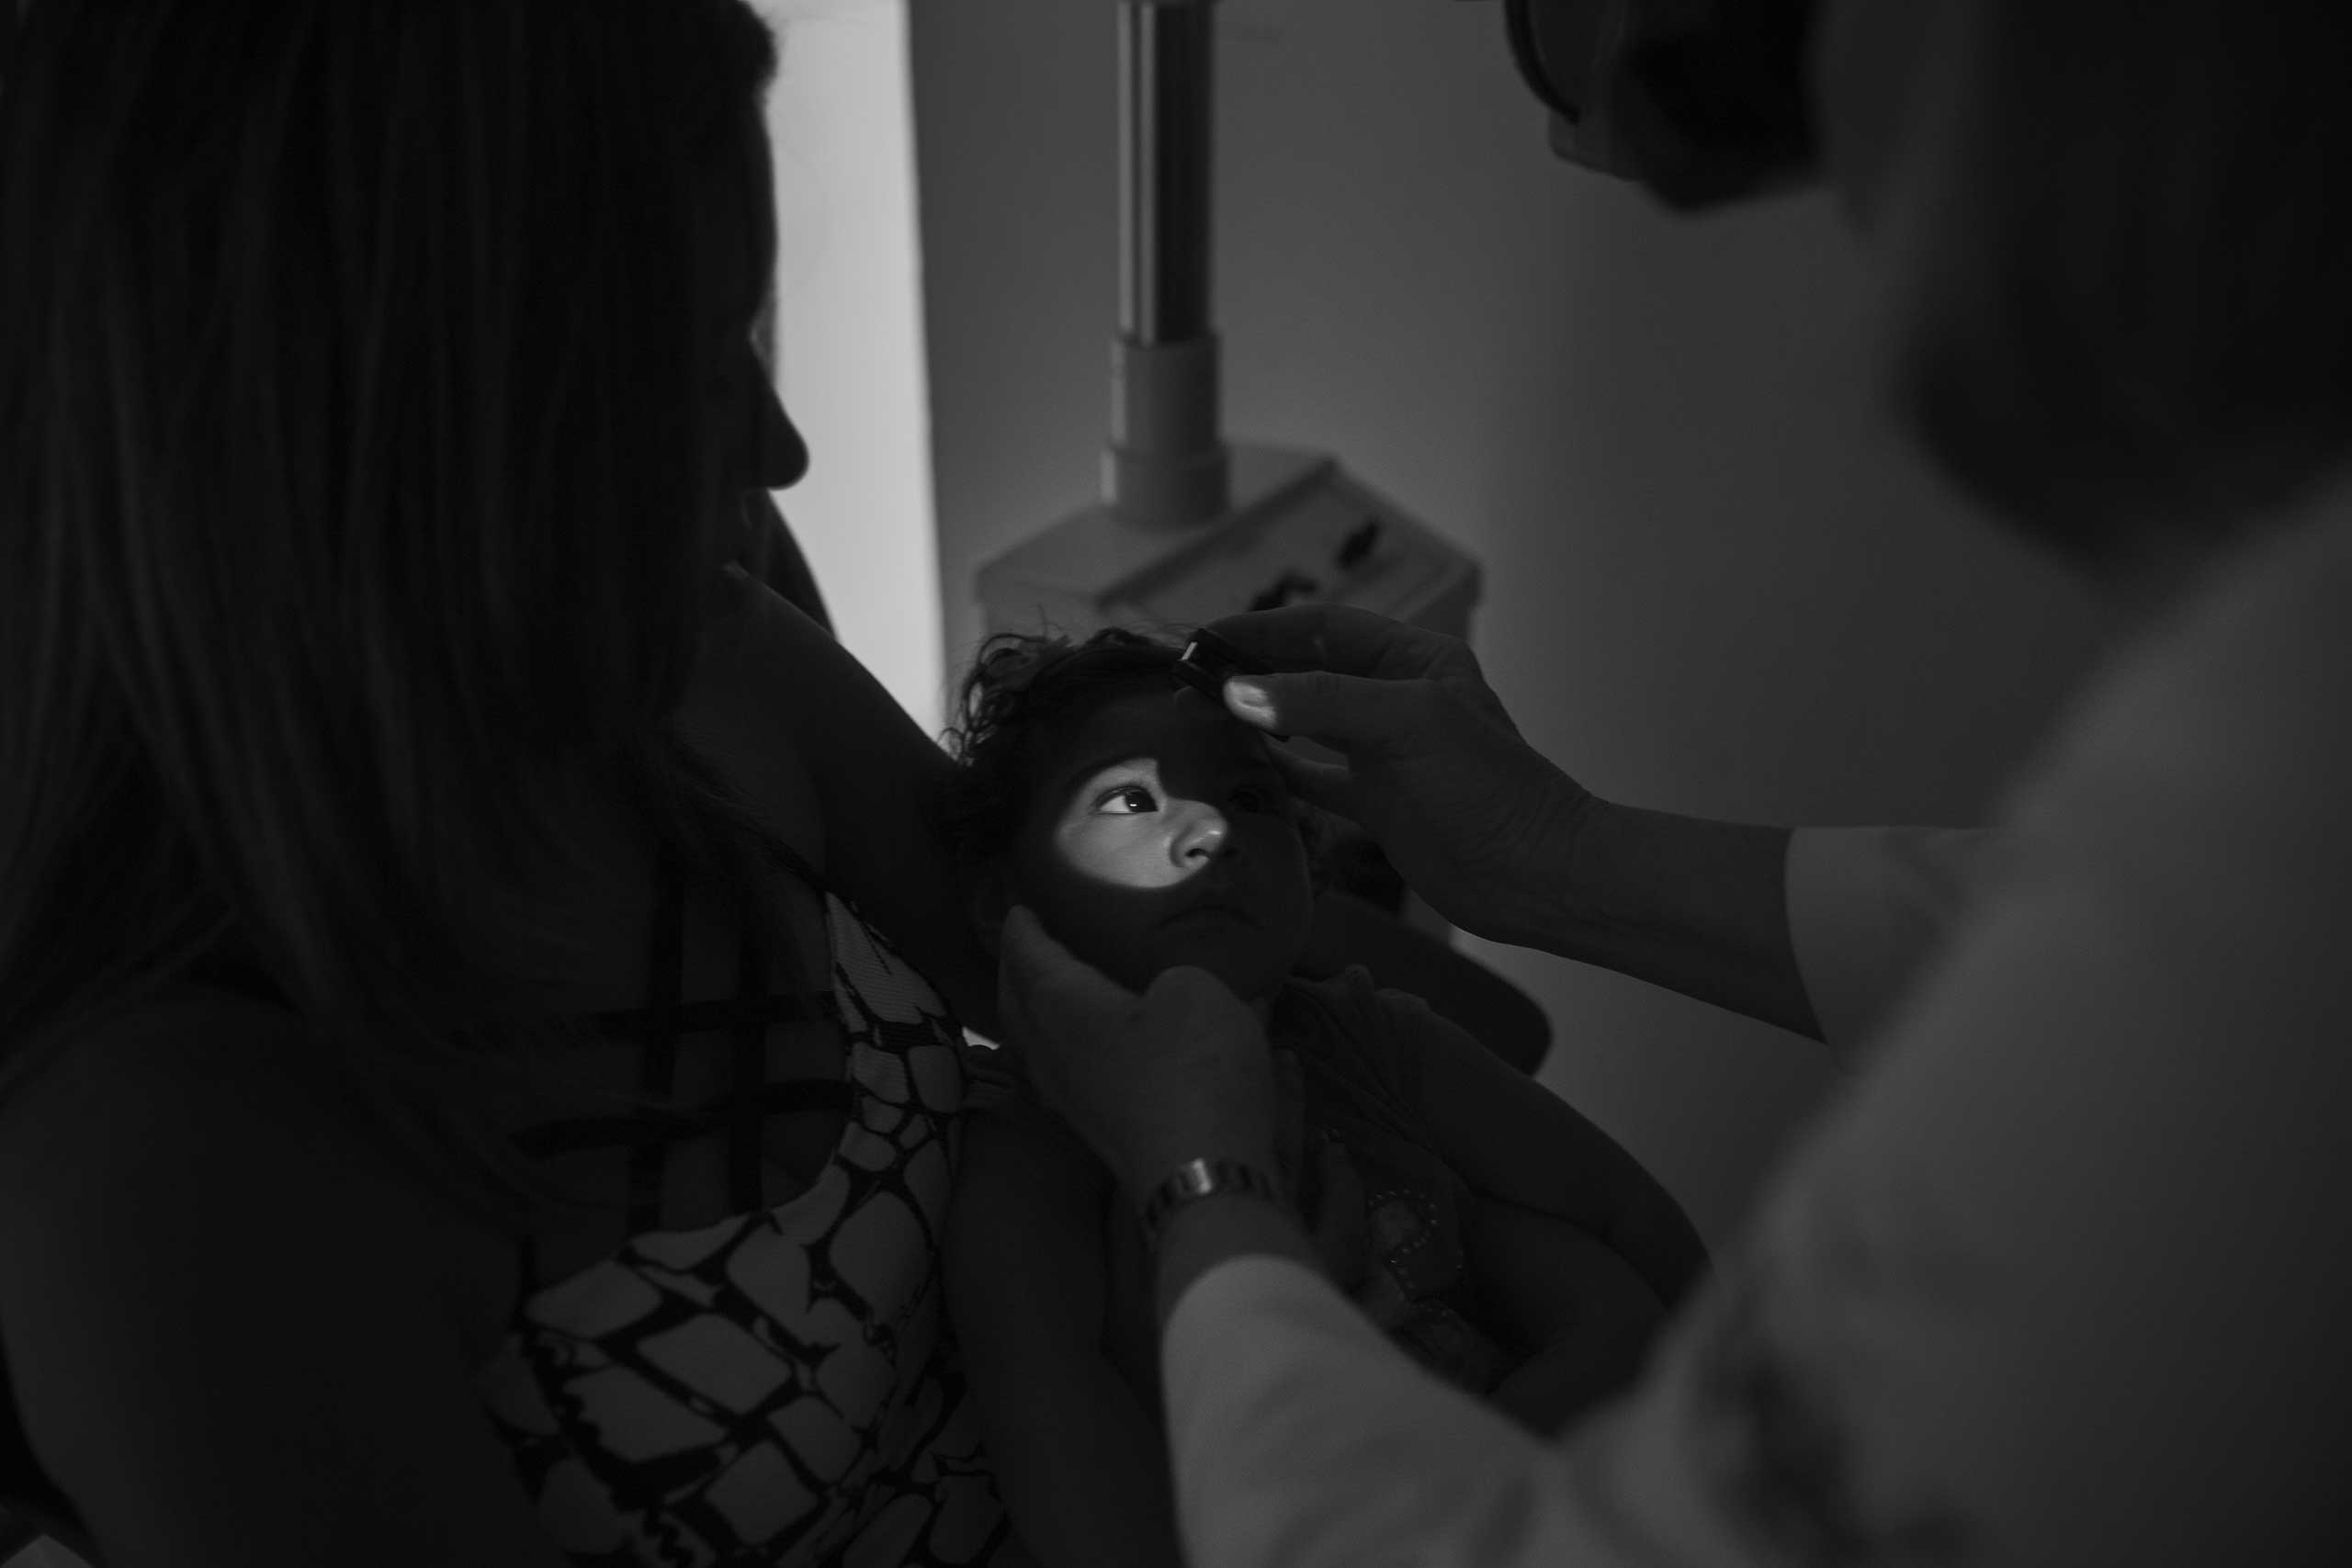 Ophthalmologist Liana Ventura examines Maria Alice, 11 months old, born with microcephaly caused by the Zika virus, while she sits in the lap of her mother, Helen Naiara, 22, at the Altino Ventura Foundation in Recife. According to doctor Liana Ventura, 40 percent of children with suspected microcephaly have ocular lesions, especially in the retina and optic nerve, and 6 percent have a hearing deficit.